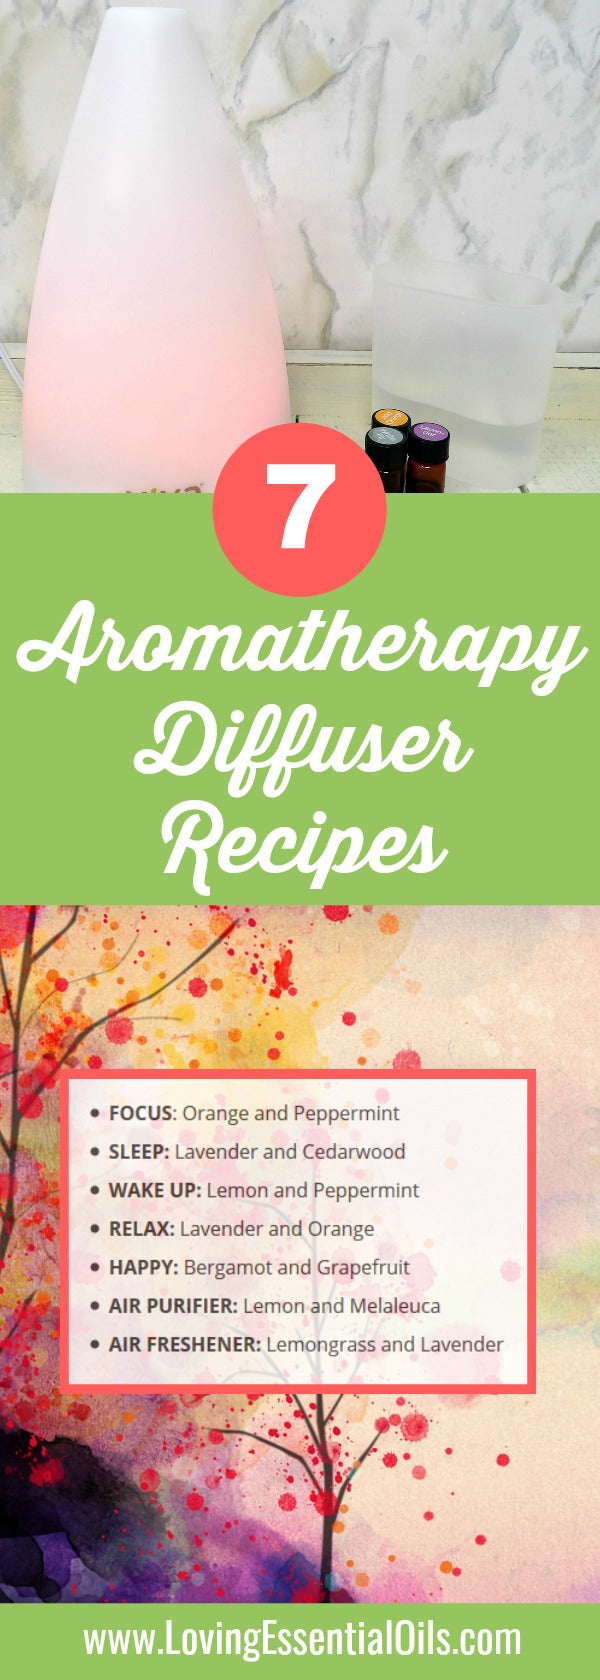 Easy essential oil recipes for diffuser by Loving Esssential Oils